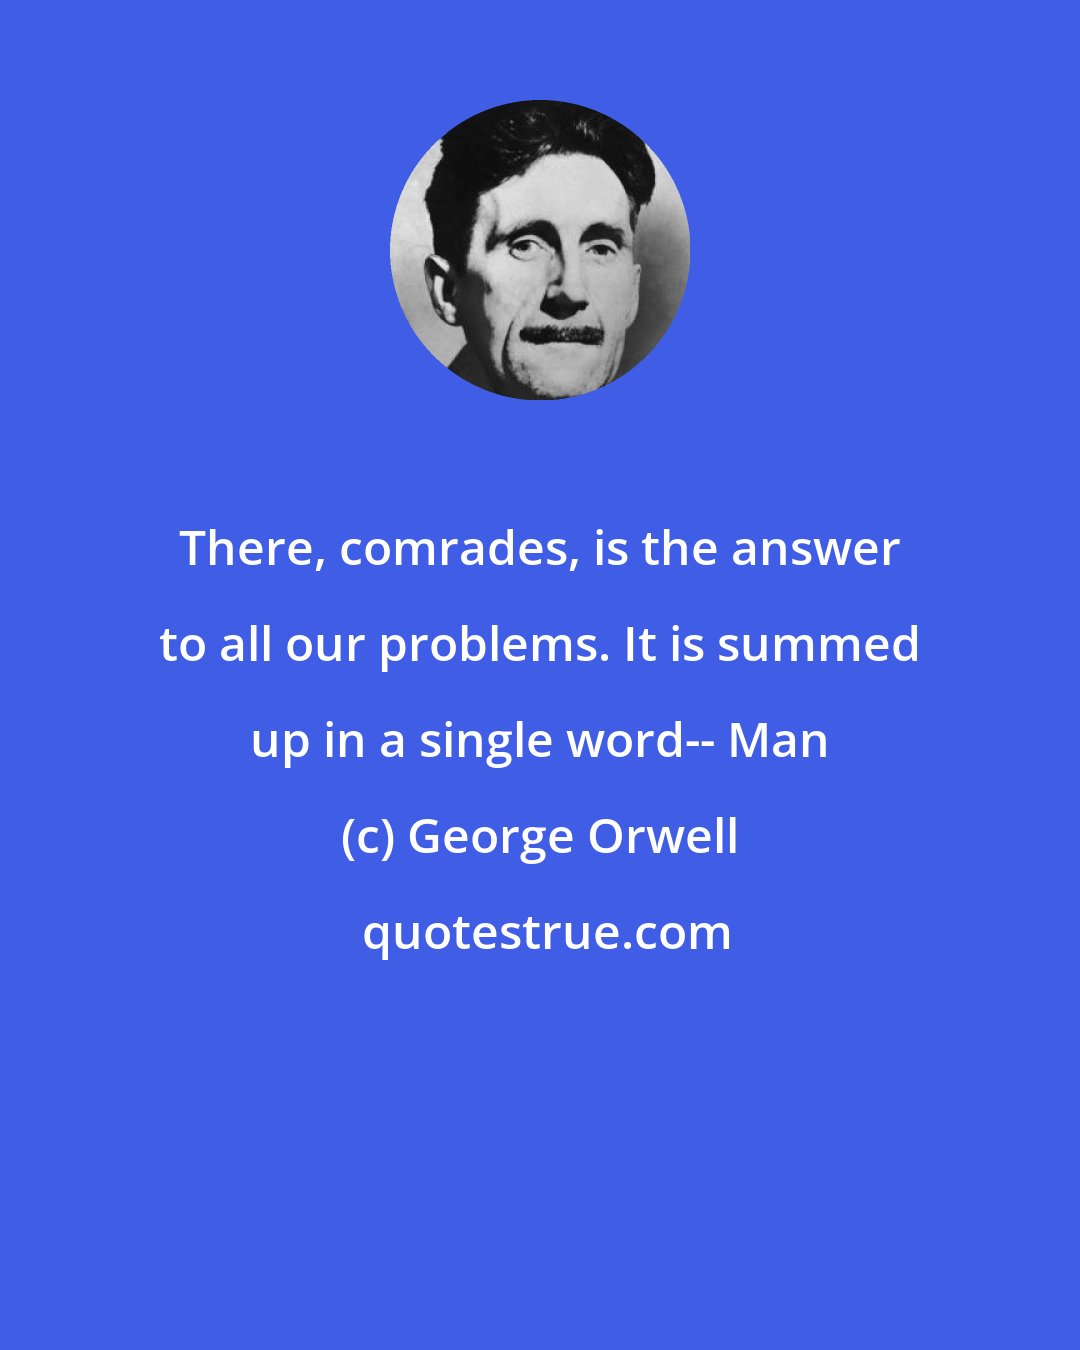 George Orwell: There, comrades, is the answer to all our problems. It is summed up in a single word-- Man